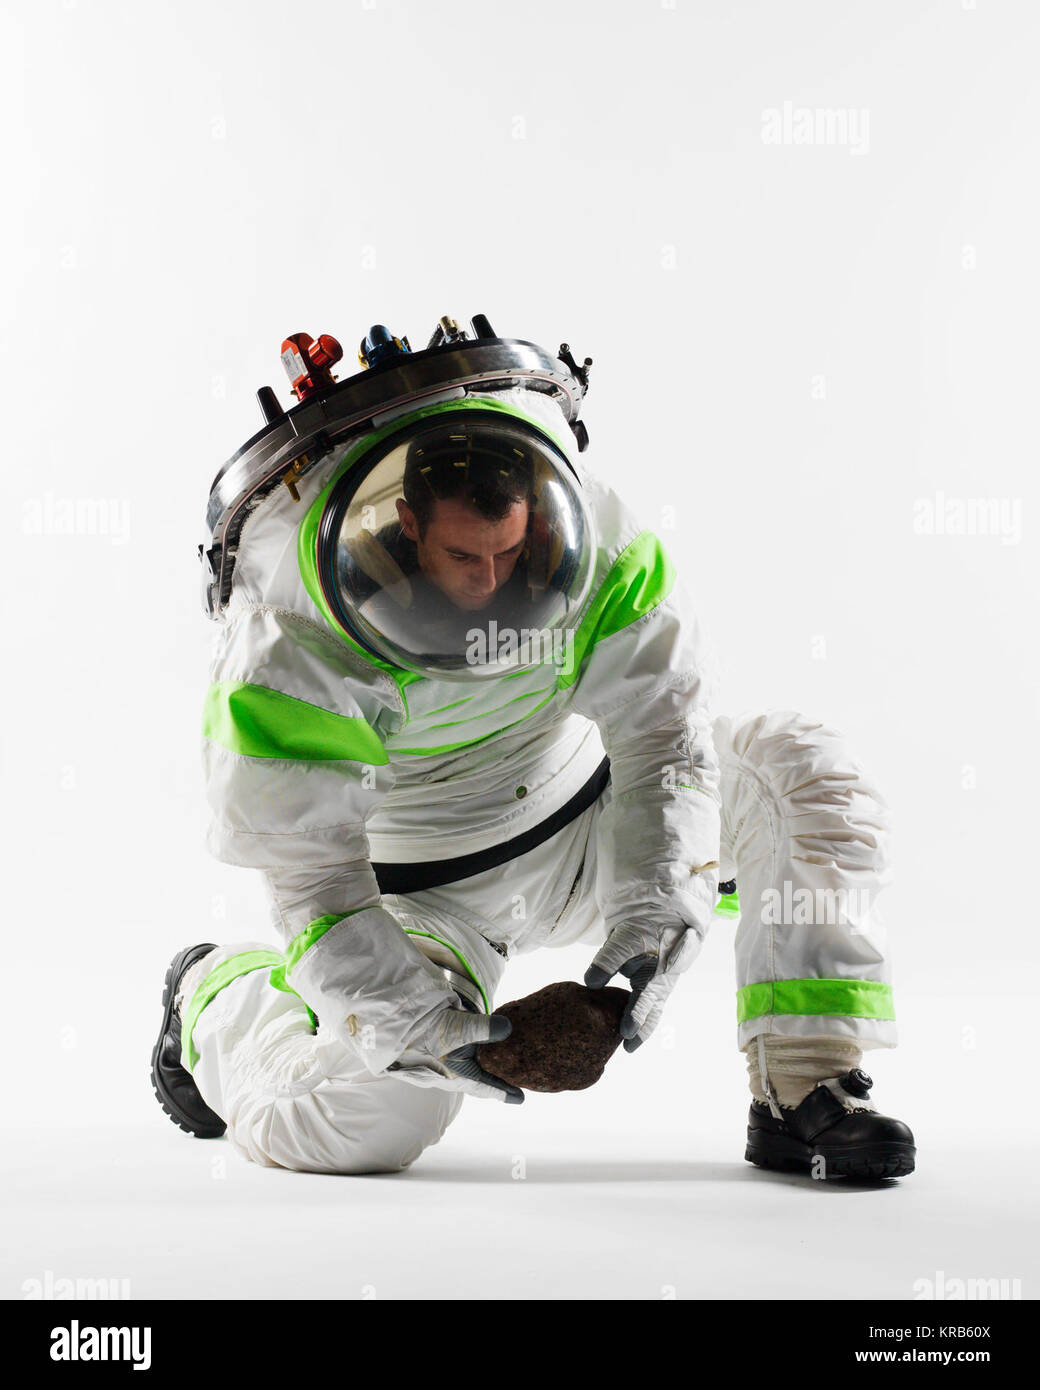 Space Suit Engineer Richard Rhodes demonstrates the Z-1 Protoype Exploration Suit in the Advanced Suit Lab in Building 34.  Photo Date: November 7, 2012.  Location: Building 34, Advanced Suit Lab.  Photographer: Robert Markowitz Z-1 Spacesuit Prototype - kneeling Nov 2012 Stock Photo